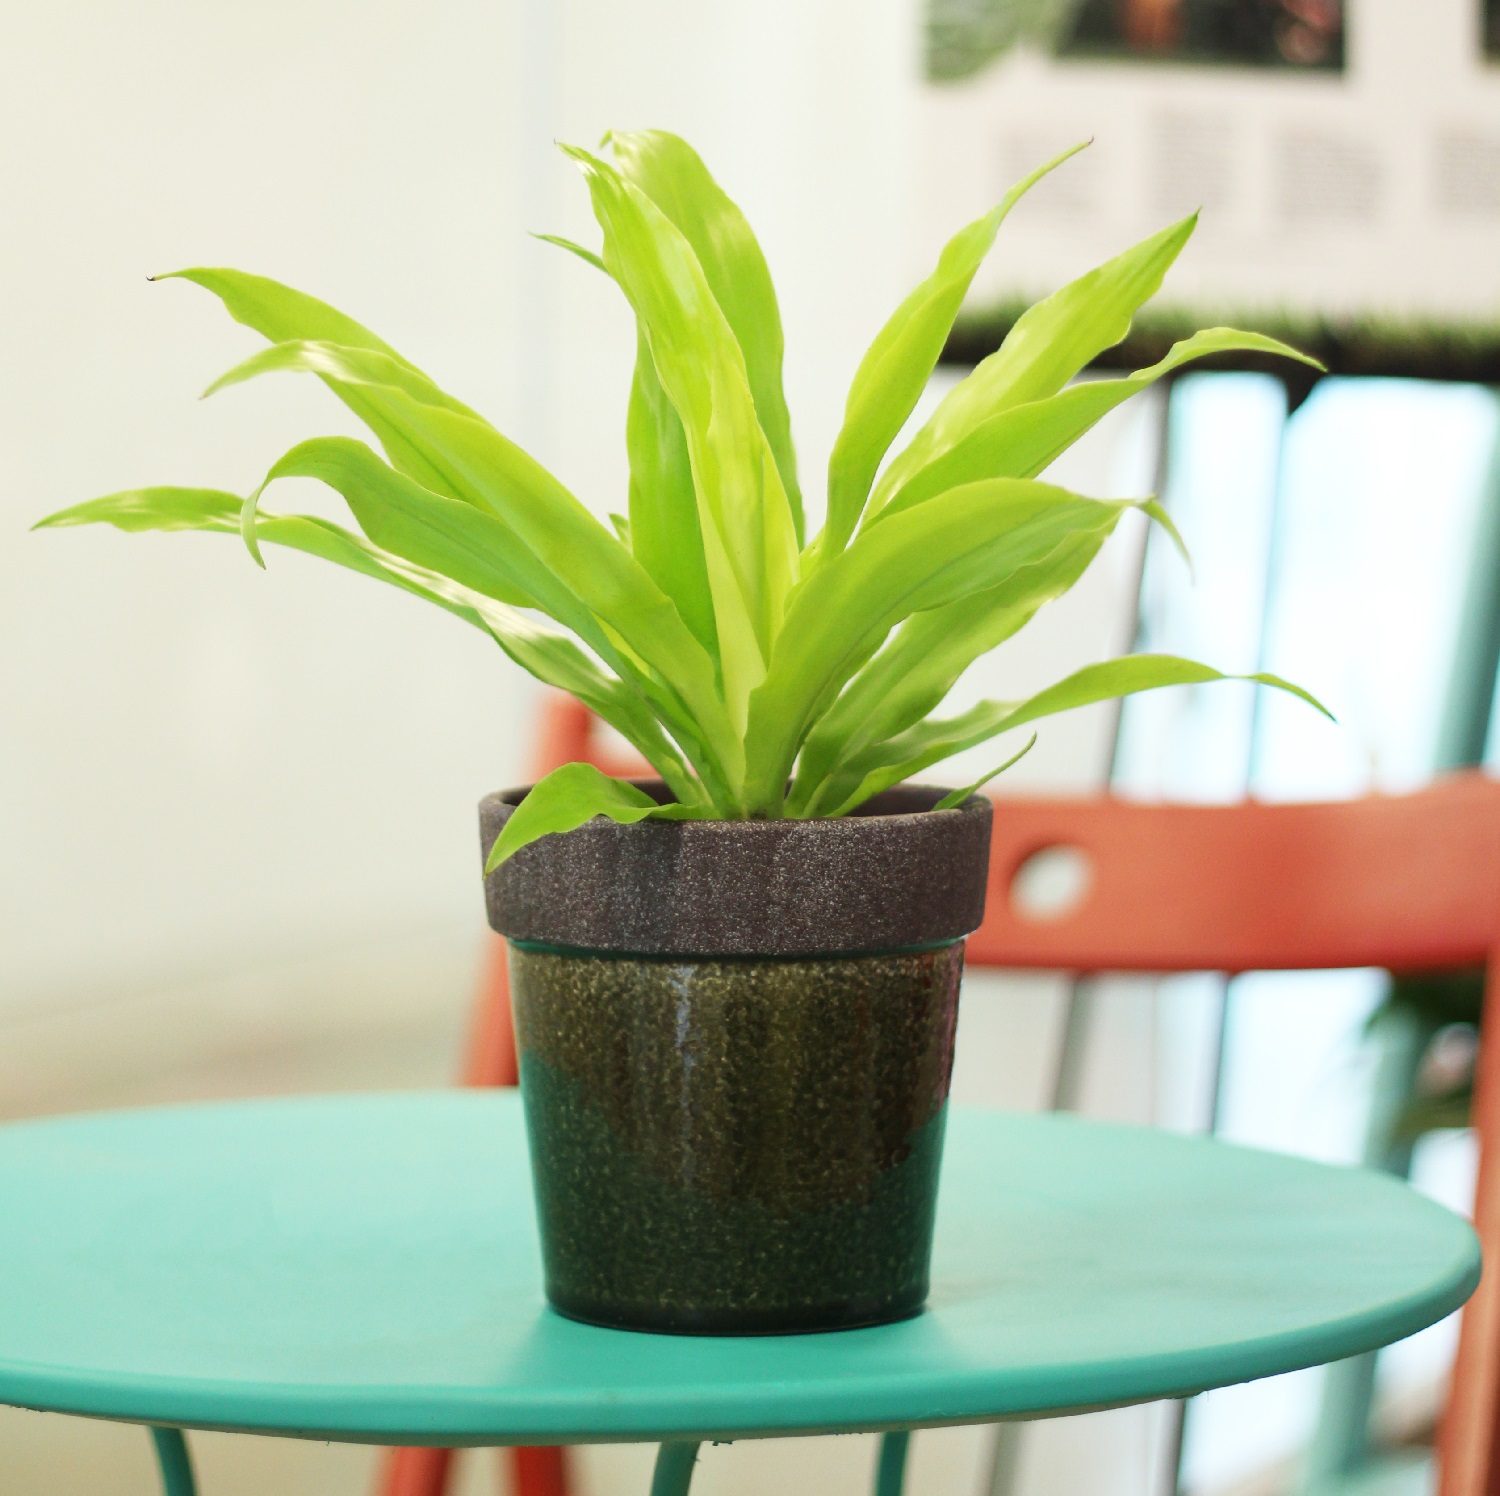 ‘Limelight’ Dracaena is a good choice for brightening any room.